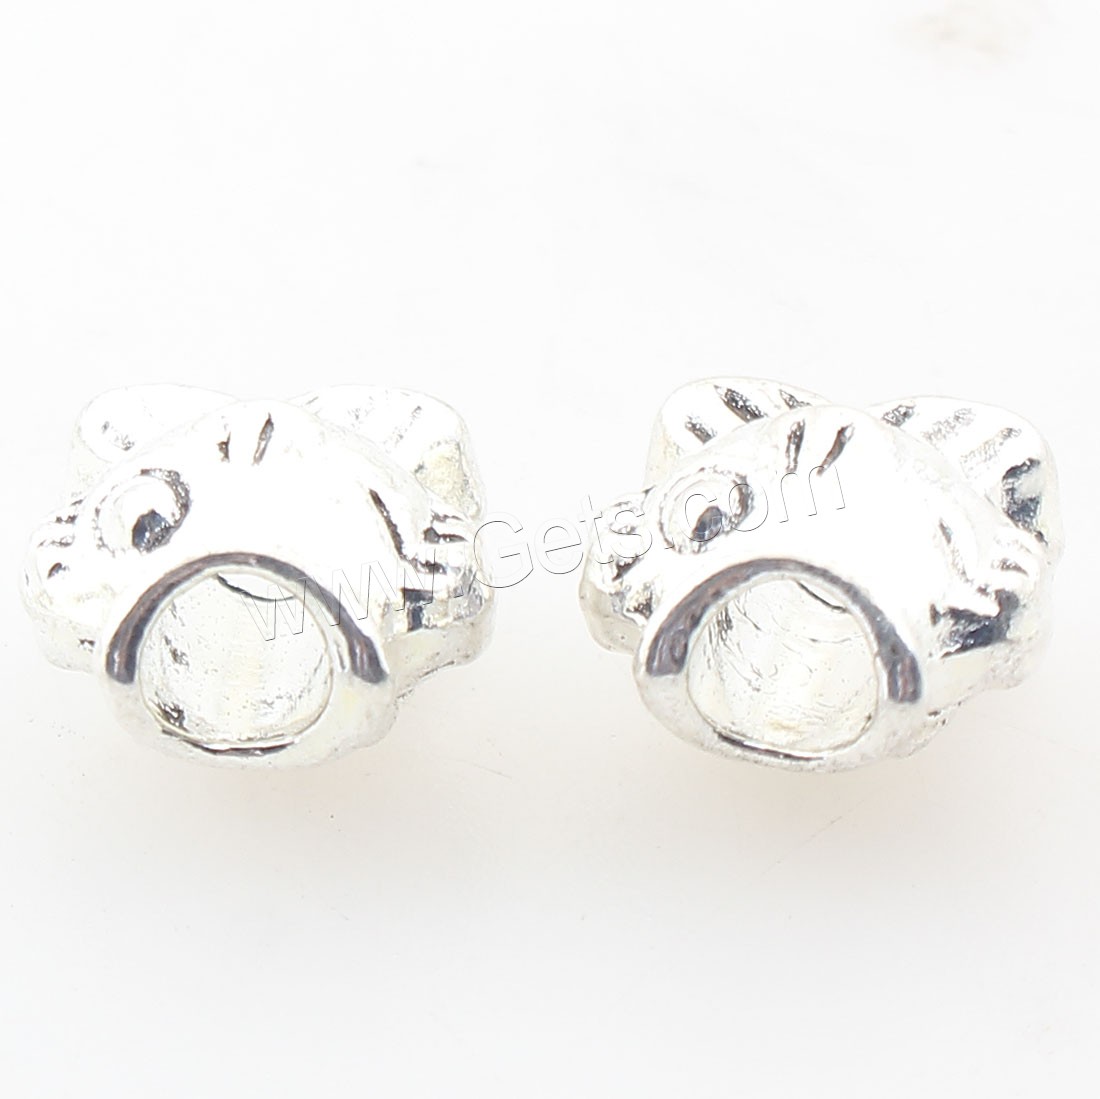 Zinc Alloy Jewelry Beads, antique silver color plated, 13x12mm, Hole:Approx 4mm, Approx 155PCs/Bag, Sold By Bag